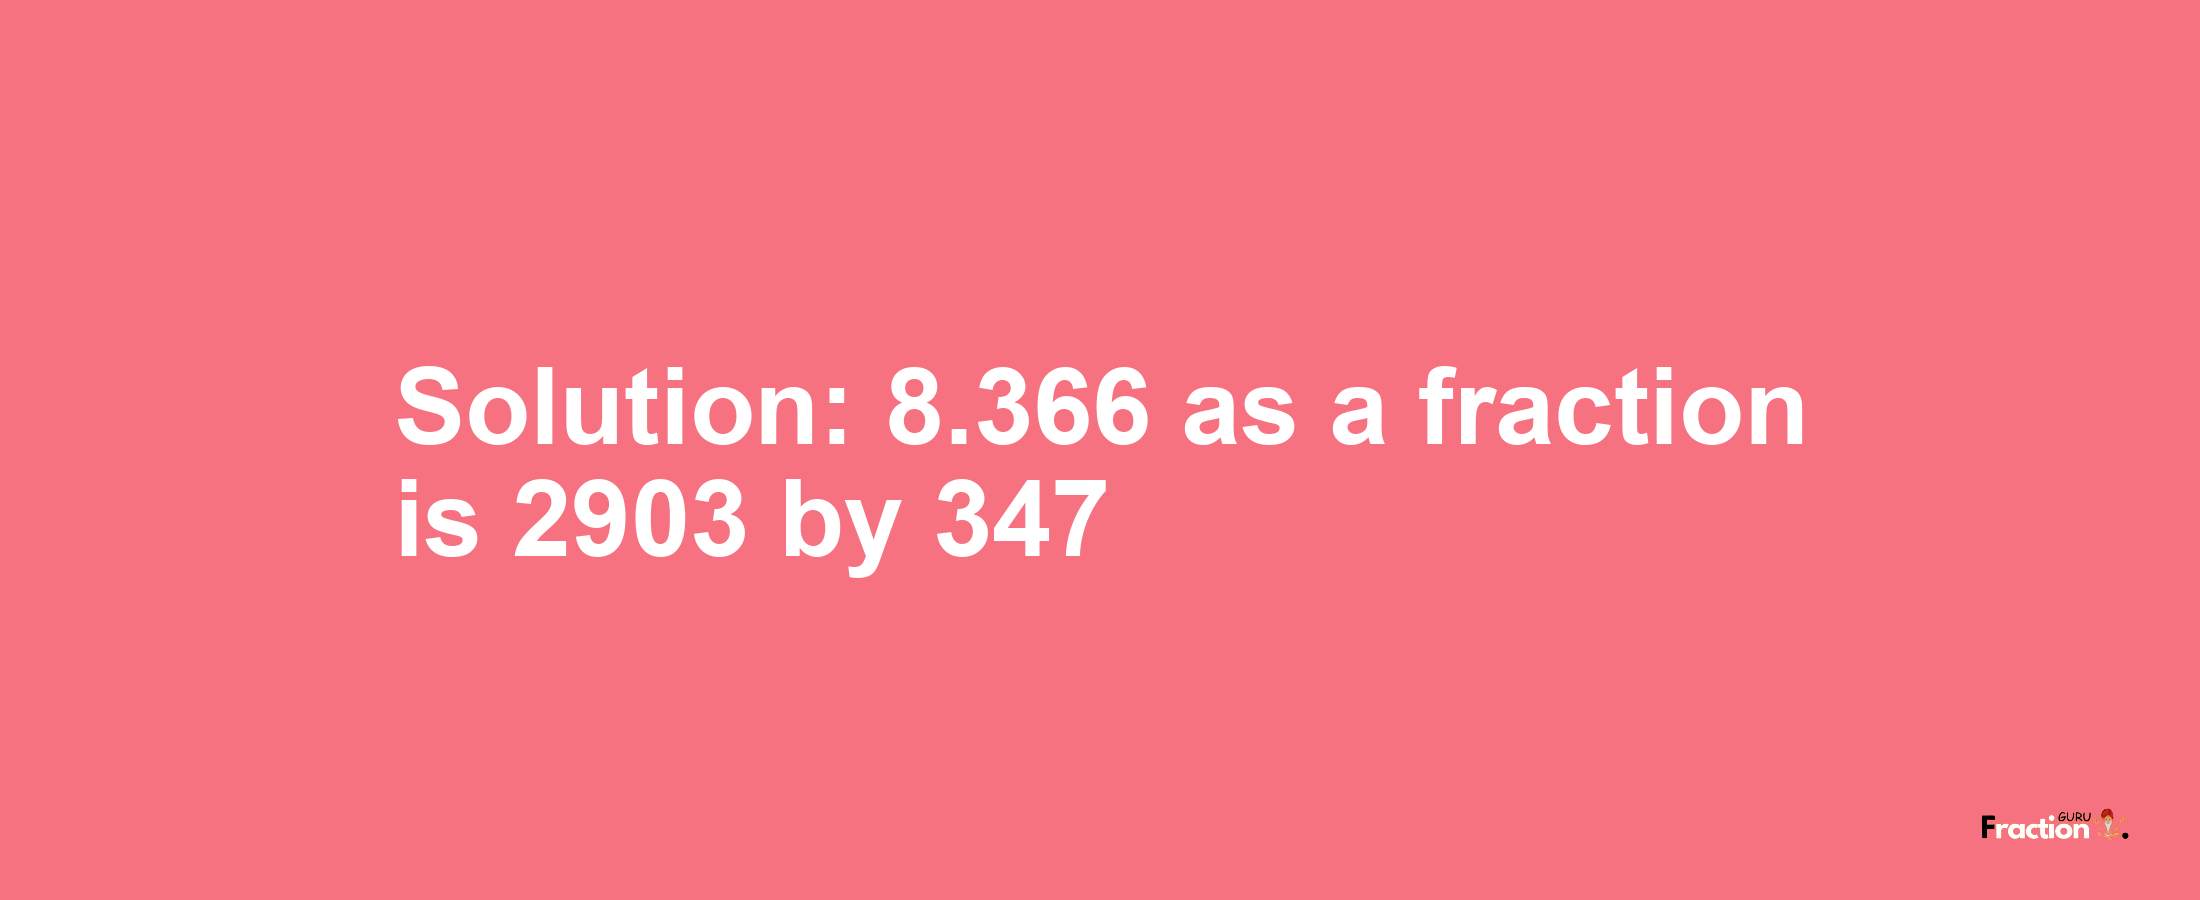 Solution:8.366 as a fraction is 2903/347